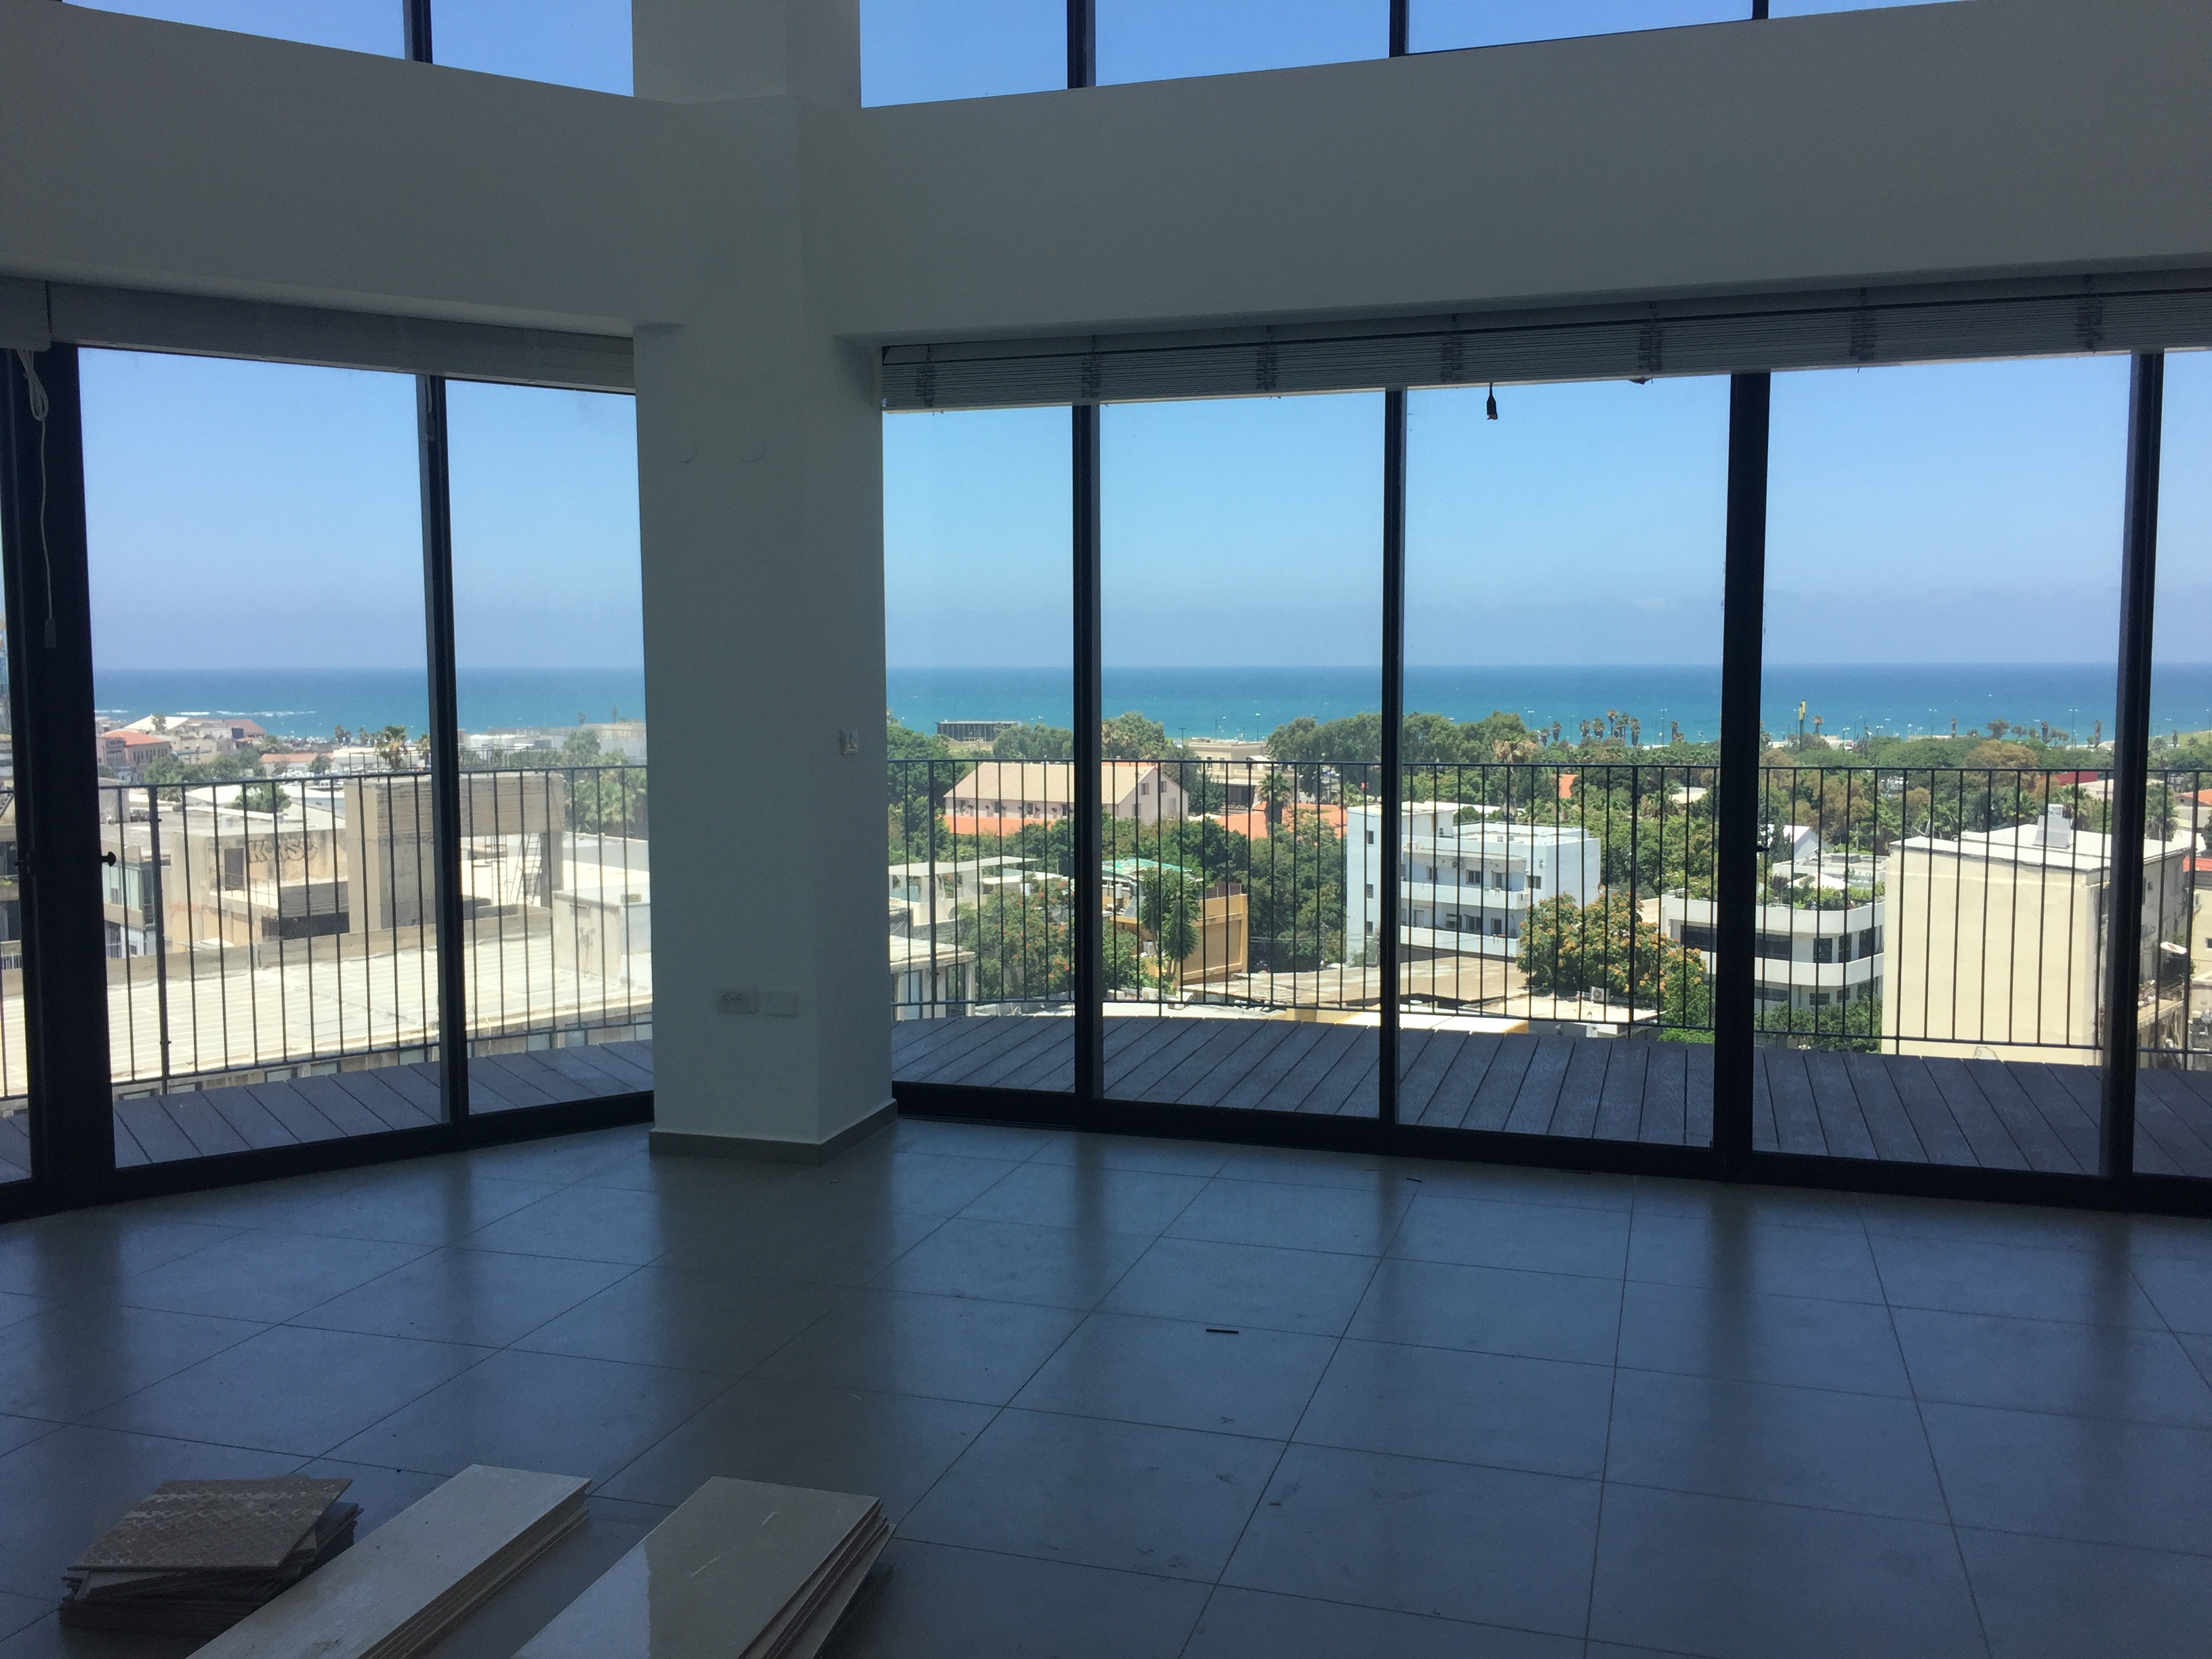 2 Bedroom Apartment for Sale with Sweeping Sea Views in Elifelet 26